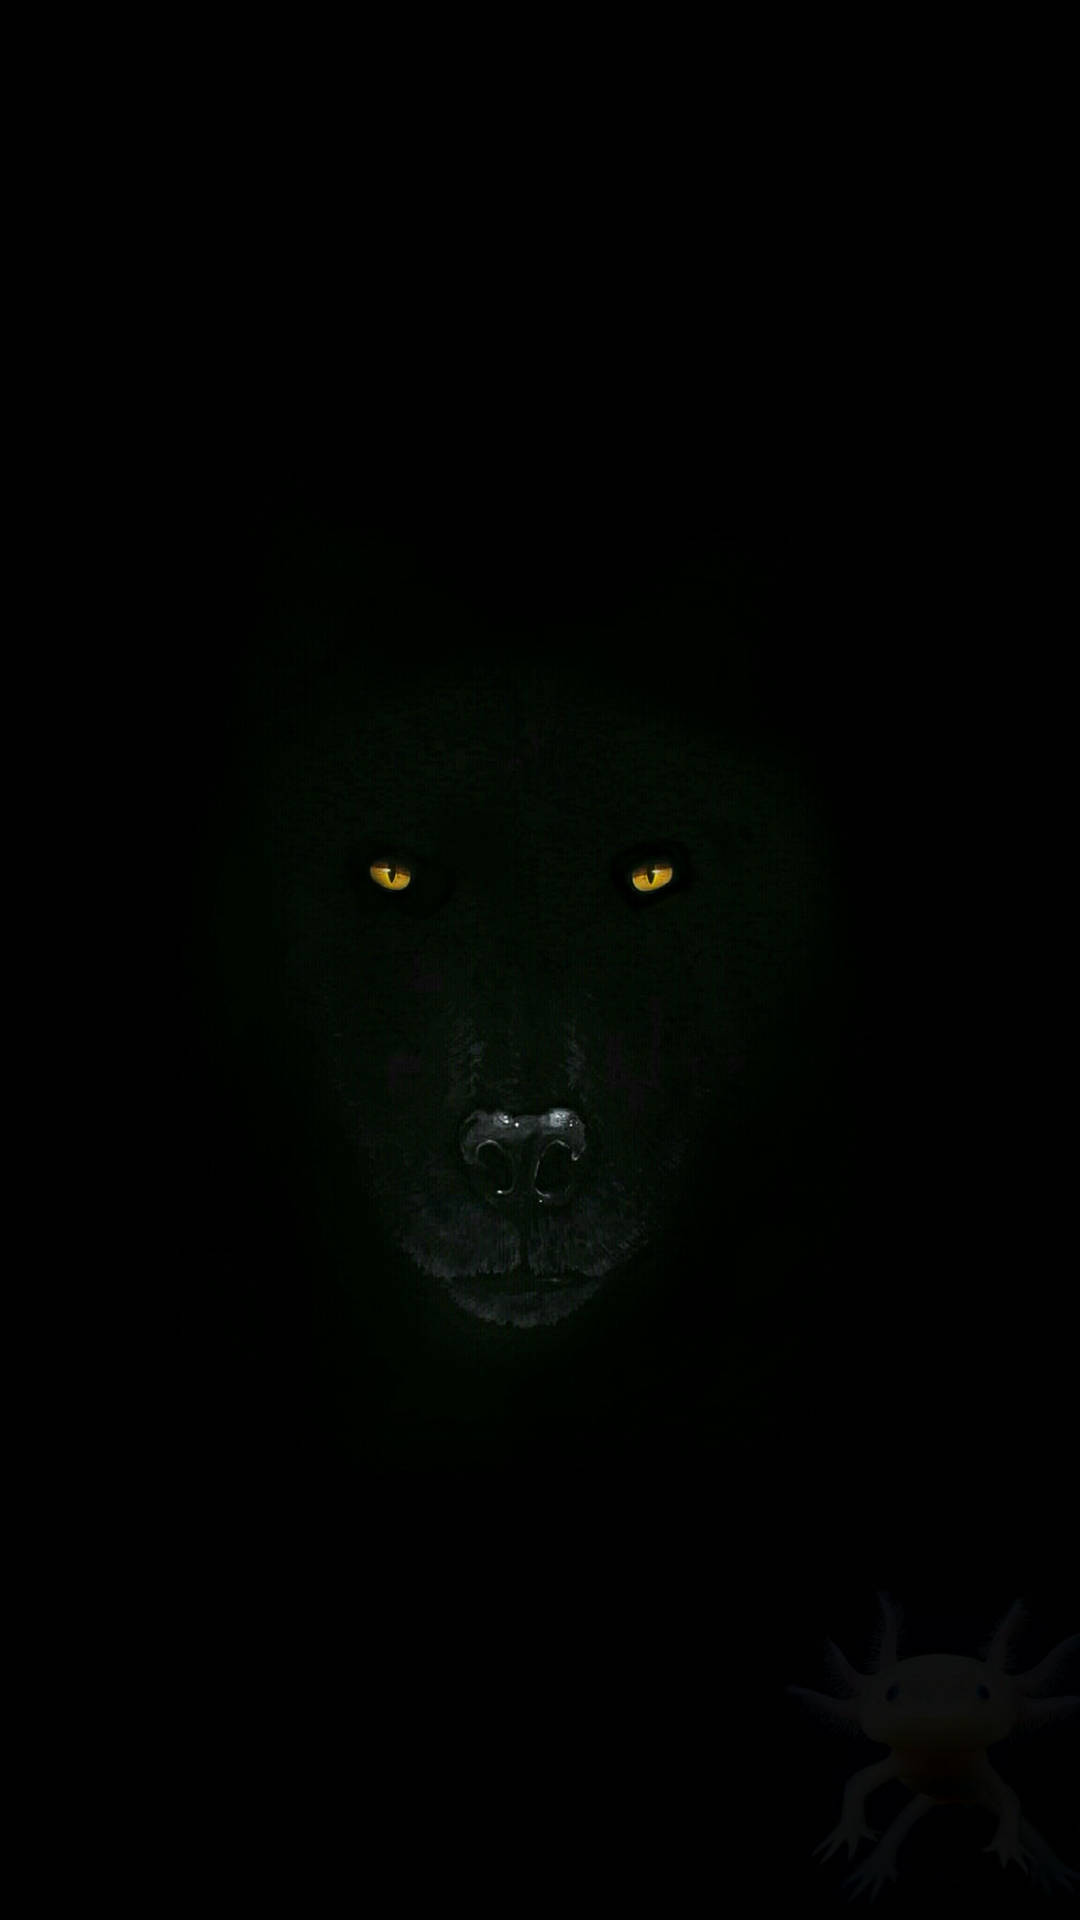 wolf picture with black background  Black And White Wolf Wallpaper Desktop  Desktop hd Black Wolf Pictures   Wolf wallpaper Wolf eyes Wolf  pictures